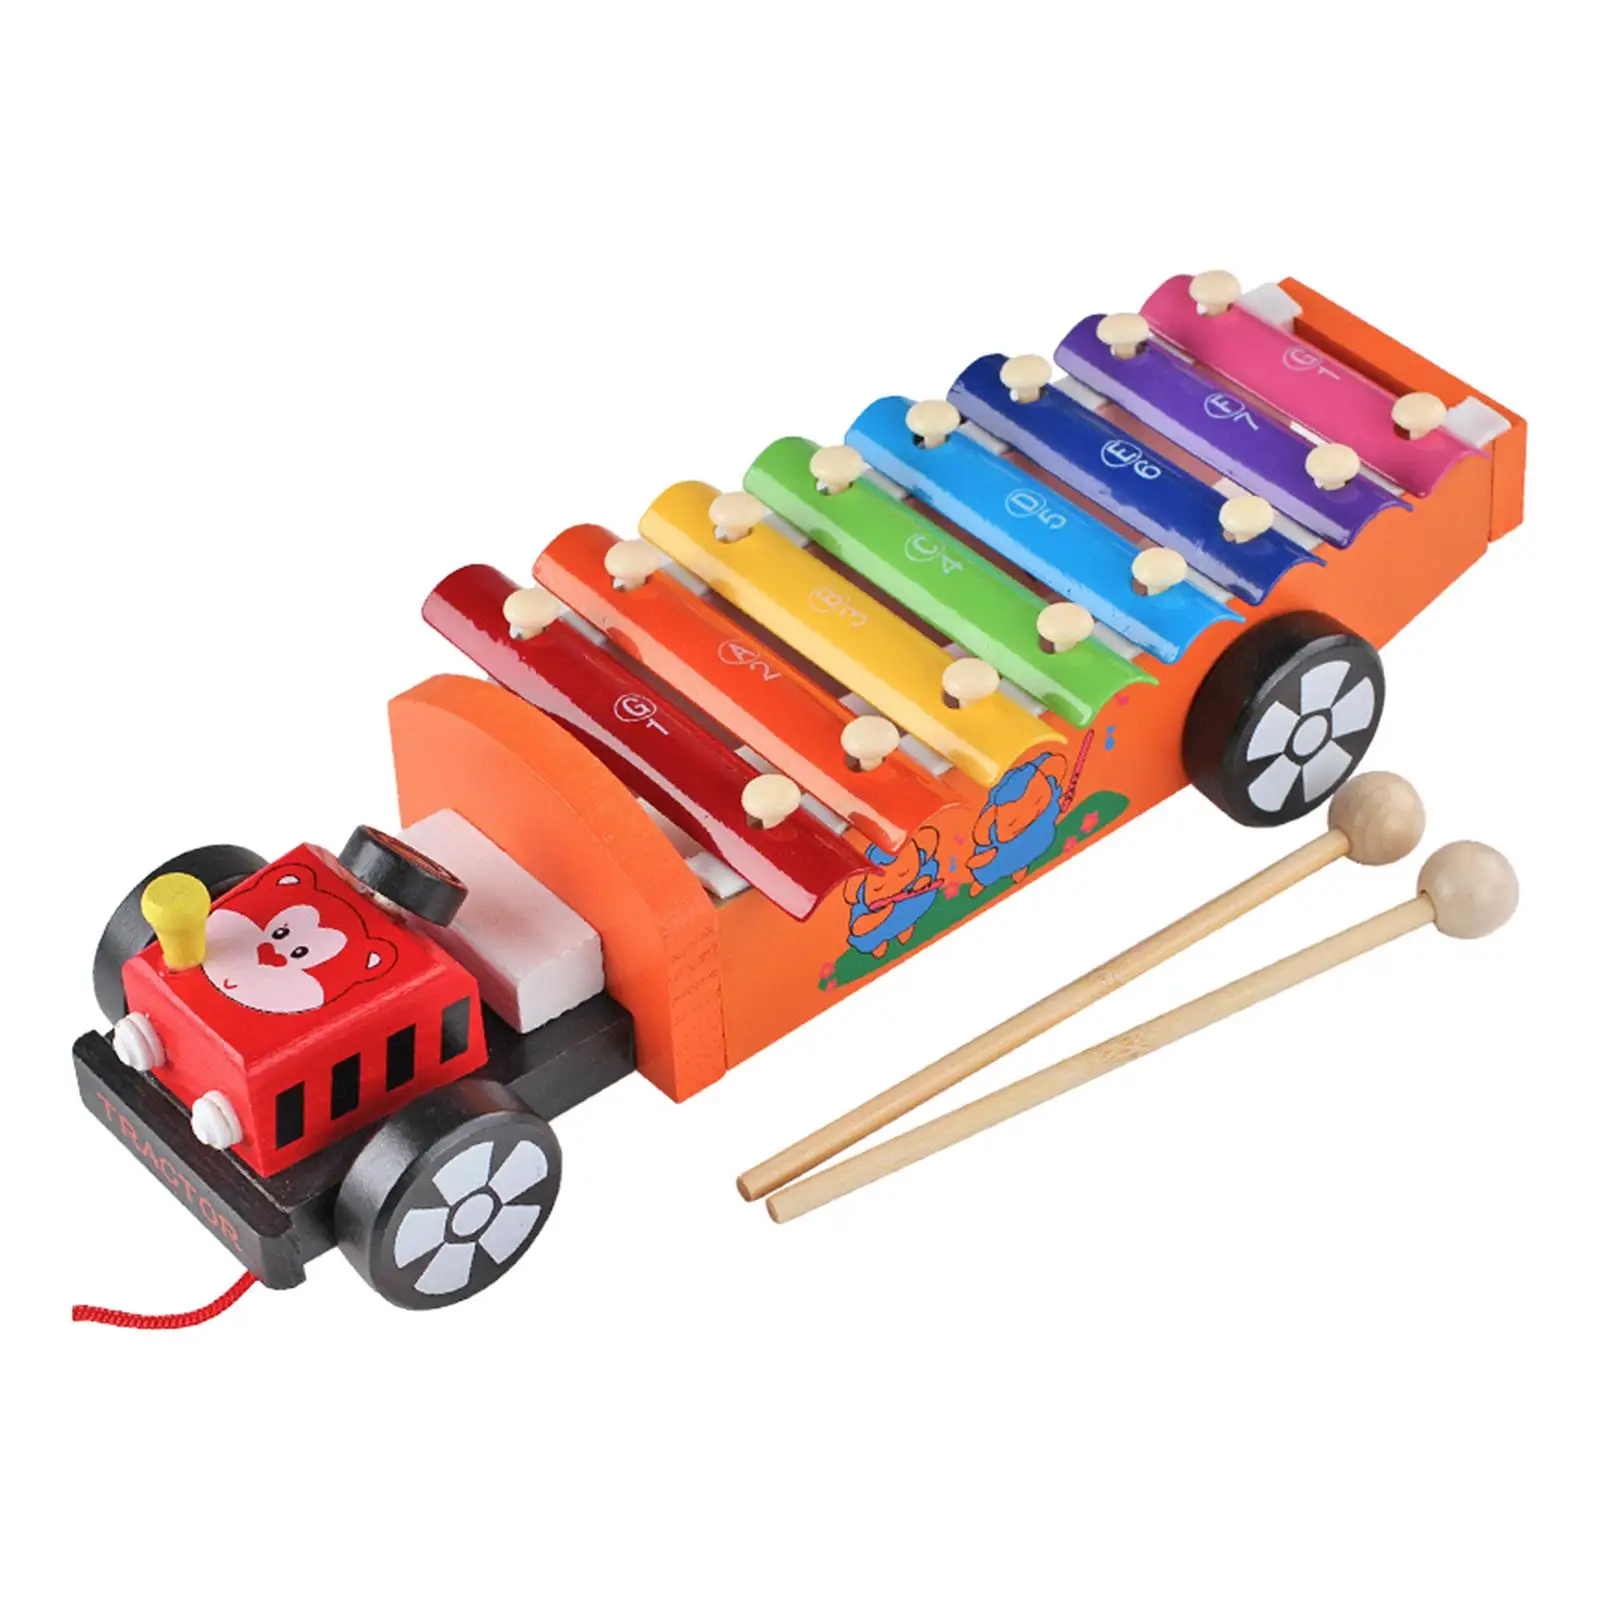 8 Note Xylophone with 2 Mallets Educational Hand Percussion Musical Instrument Valentines Day Gifts for Kids Adults Beginners